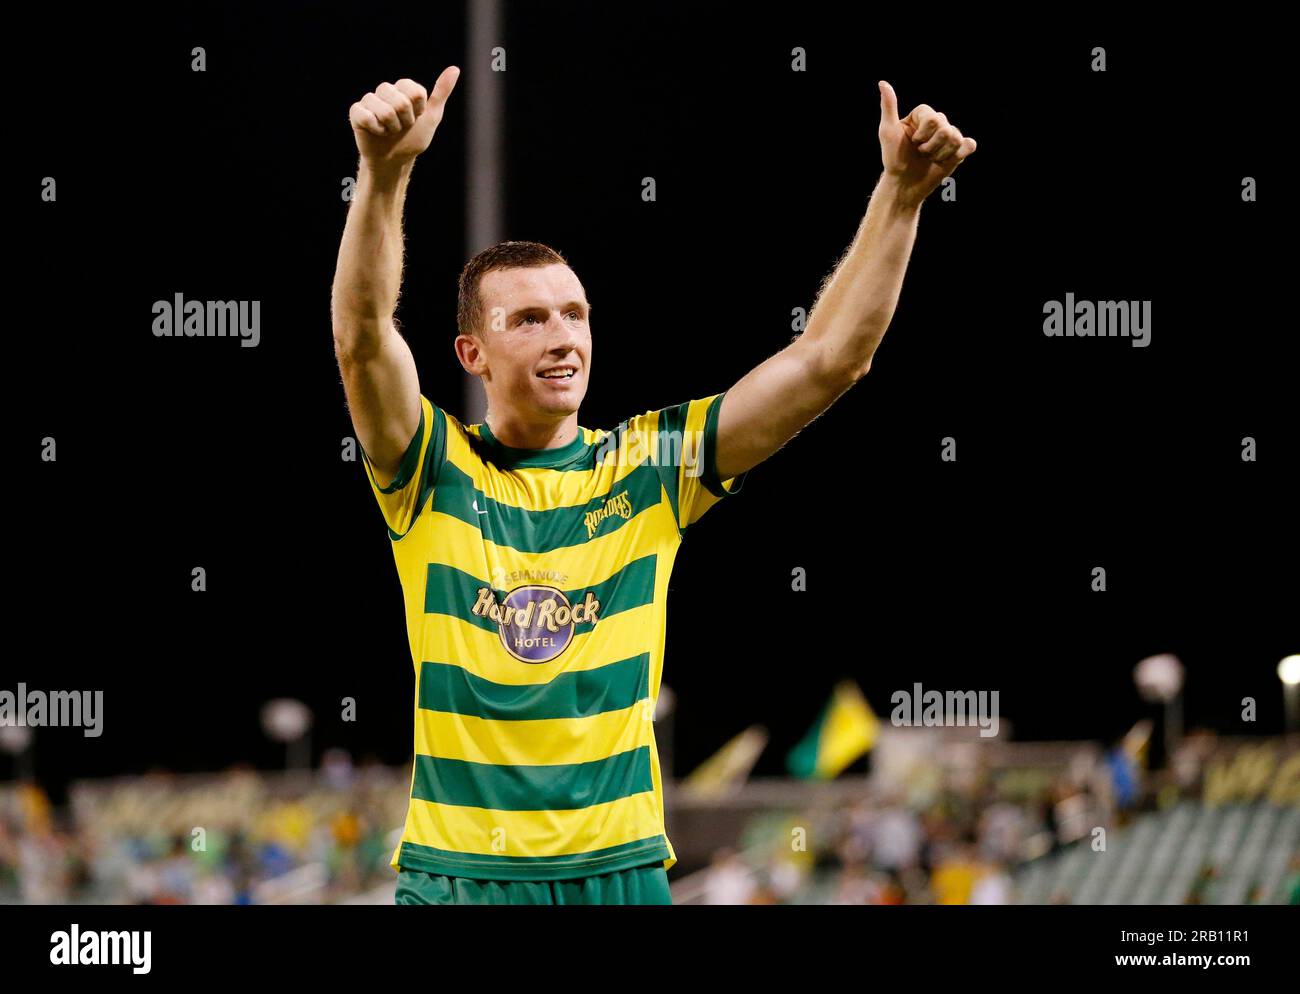 JULY 29, 2017 - ST. PETERSBURG, FLORIDA: Neill Collins celebrates following the Tampa Bay Rowdies match against Pittsburgh Riverhounds at Al Lang Field. Collins was named the Head Coach at Barnsley F.C. on July 6, 2023. Stock Photo